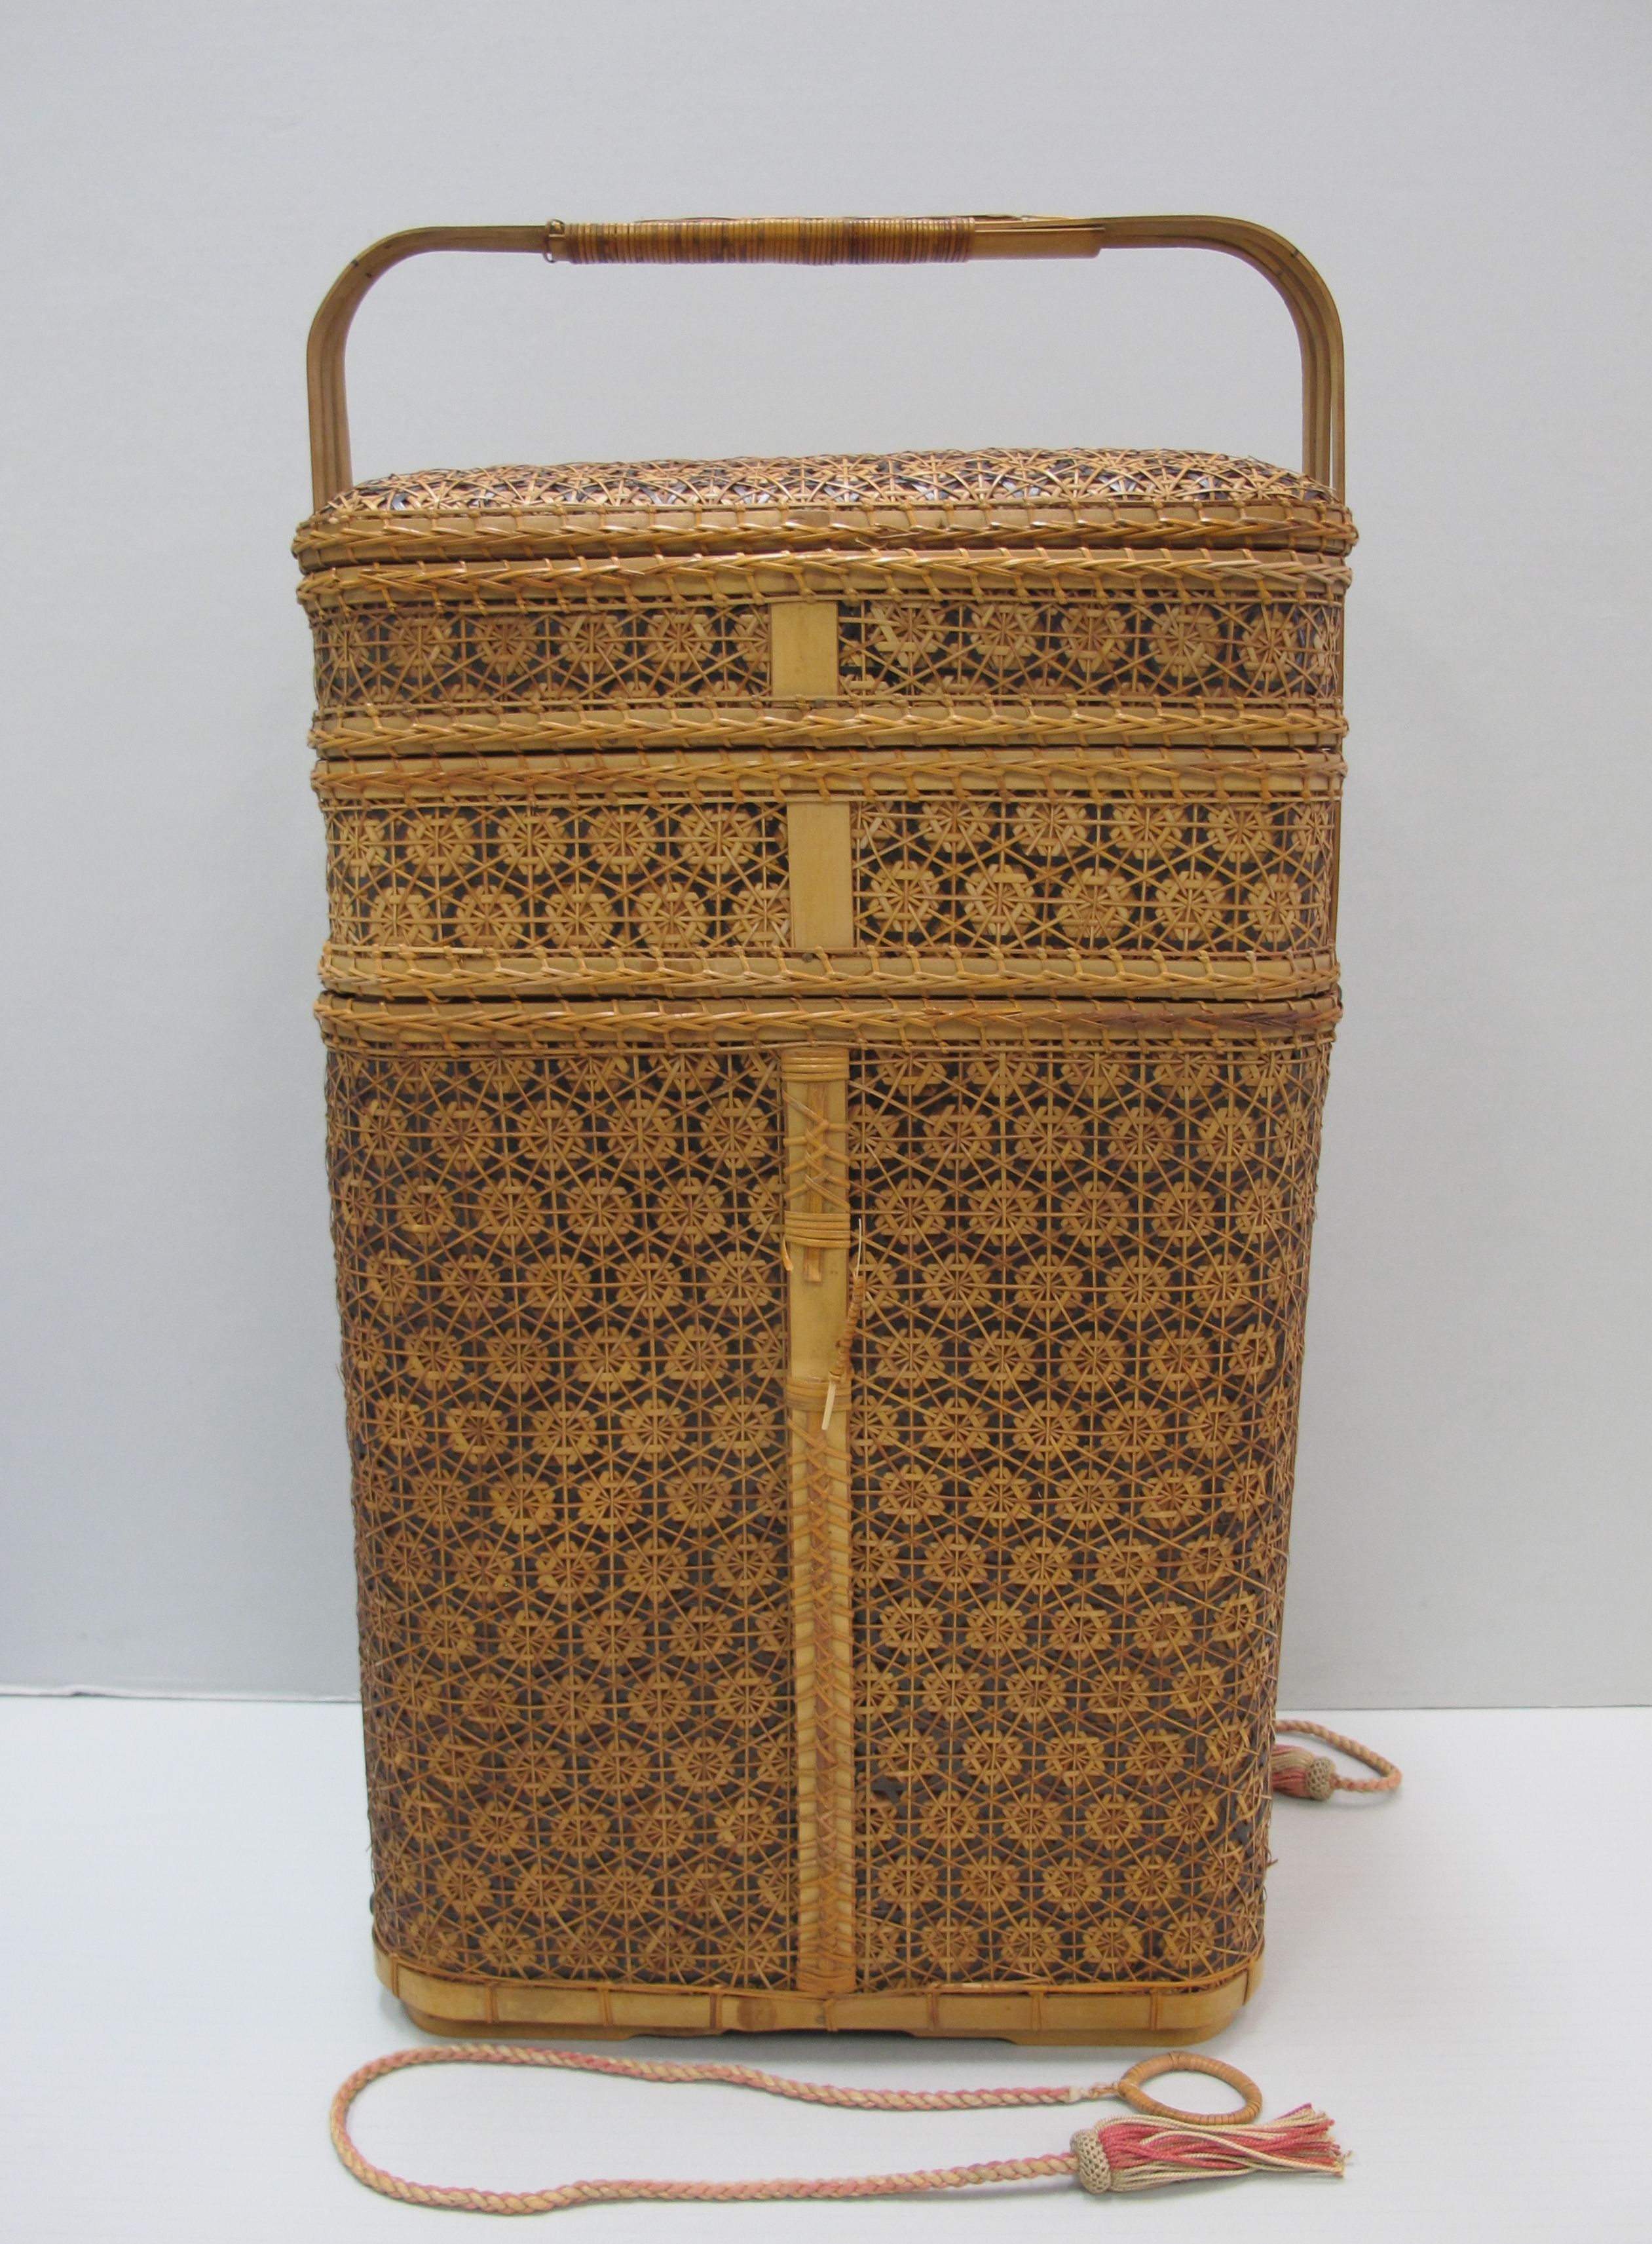 Intricately woven bamboo basket with three tiered compartments, a lid, handle and two silk ties with tasseled ends.